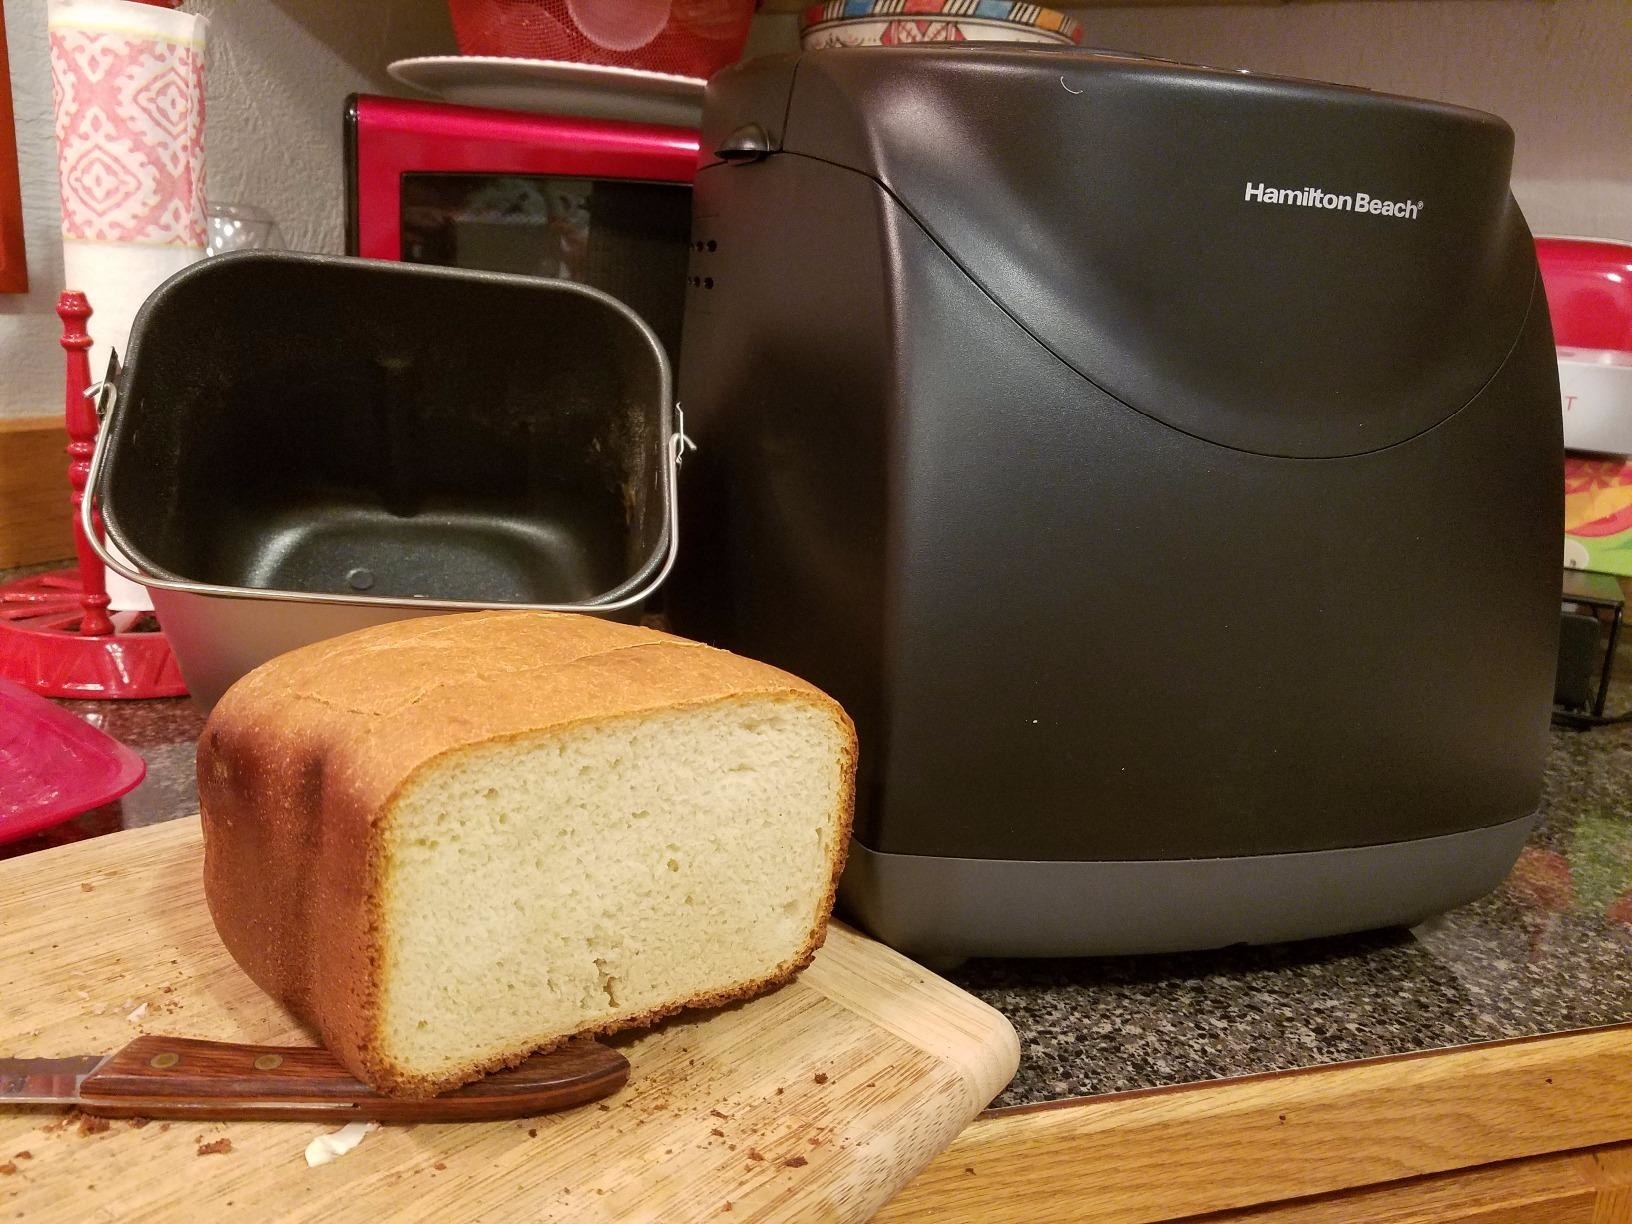 The appliance and some bread it made, which the reviewer cut into so you can see how perfect it is